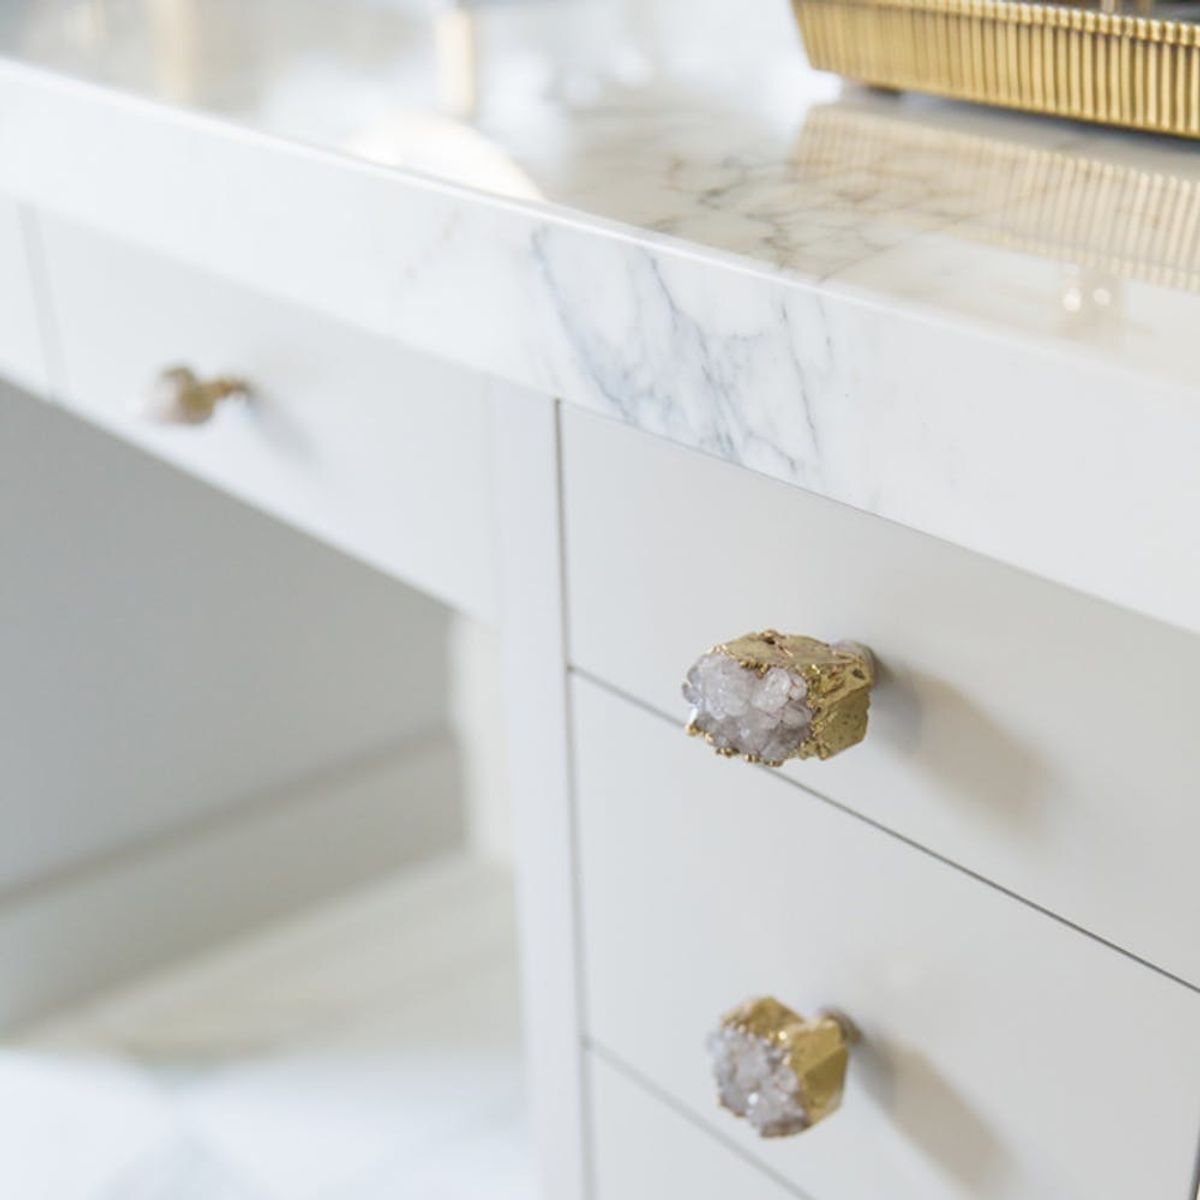 18 Classy Ways to Add Crystals, Stones and Good Vibes to Your Home Decor